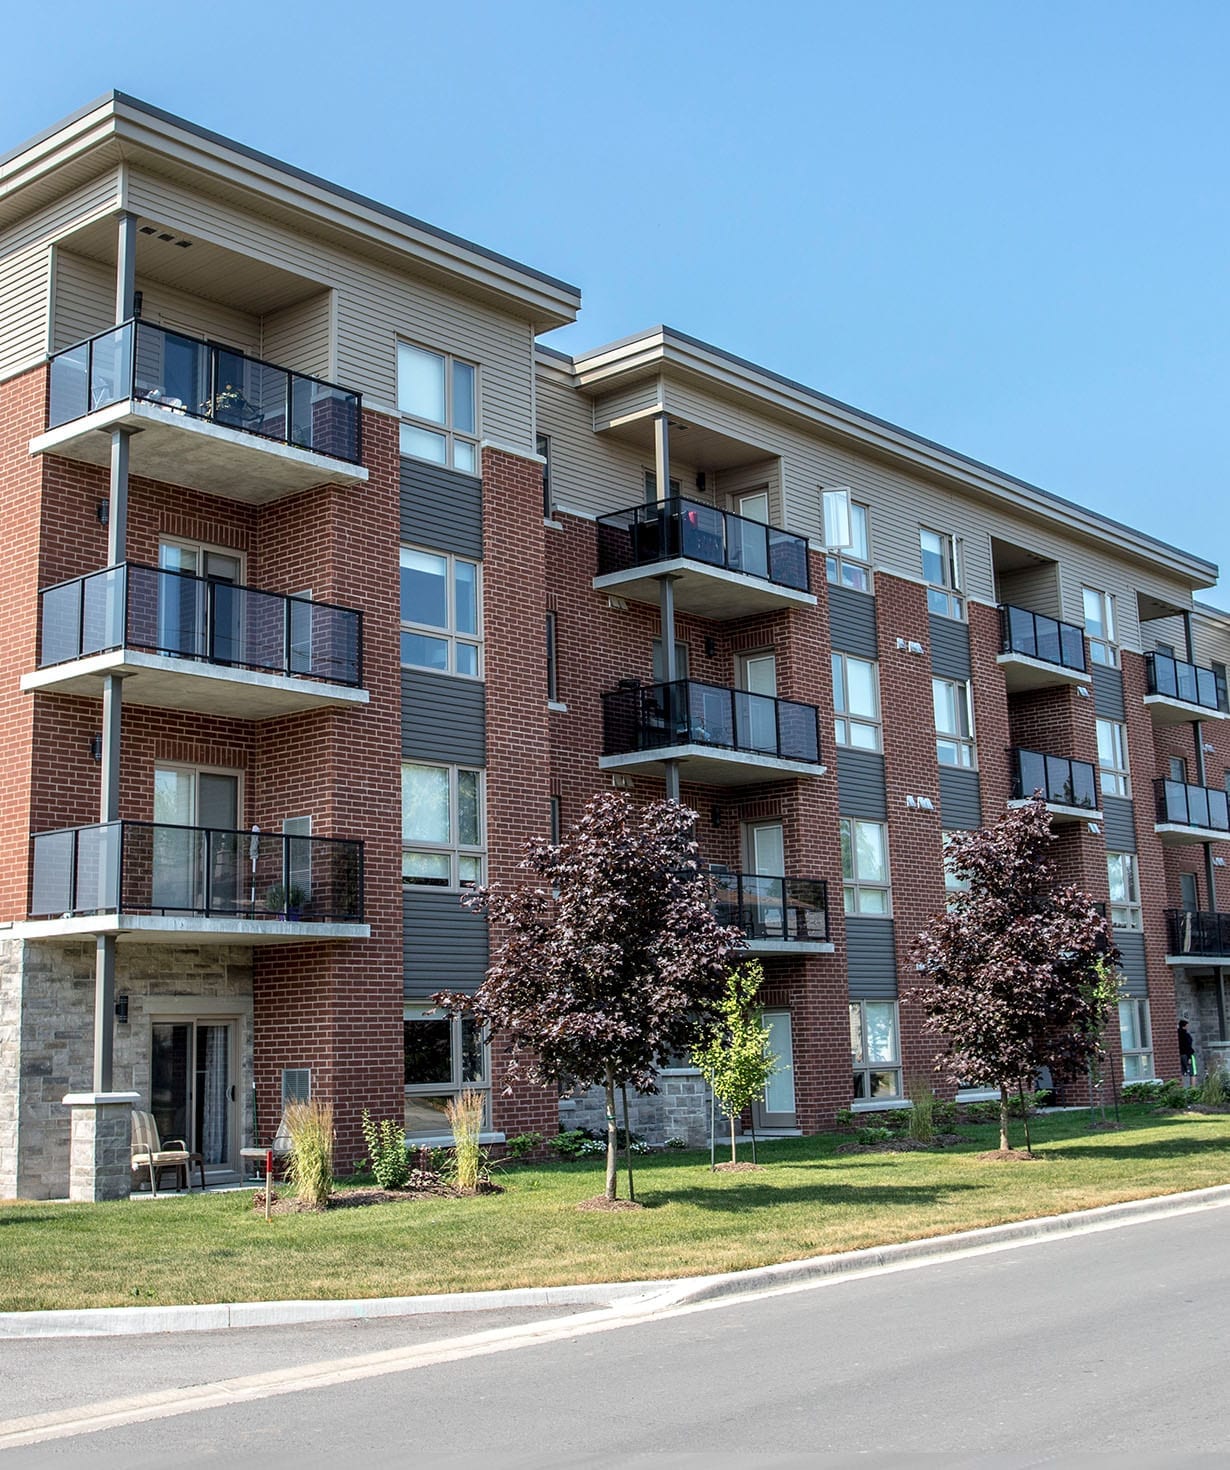 Skyline Apartment REIT Continues Growing in Stratford, ON